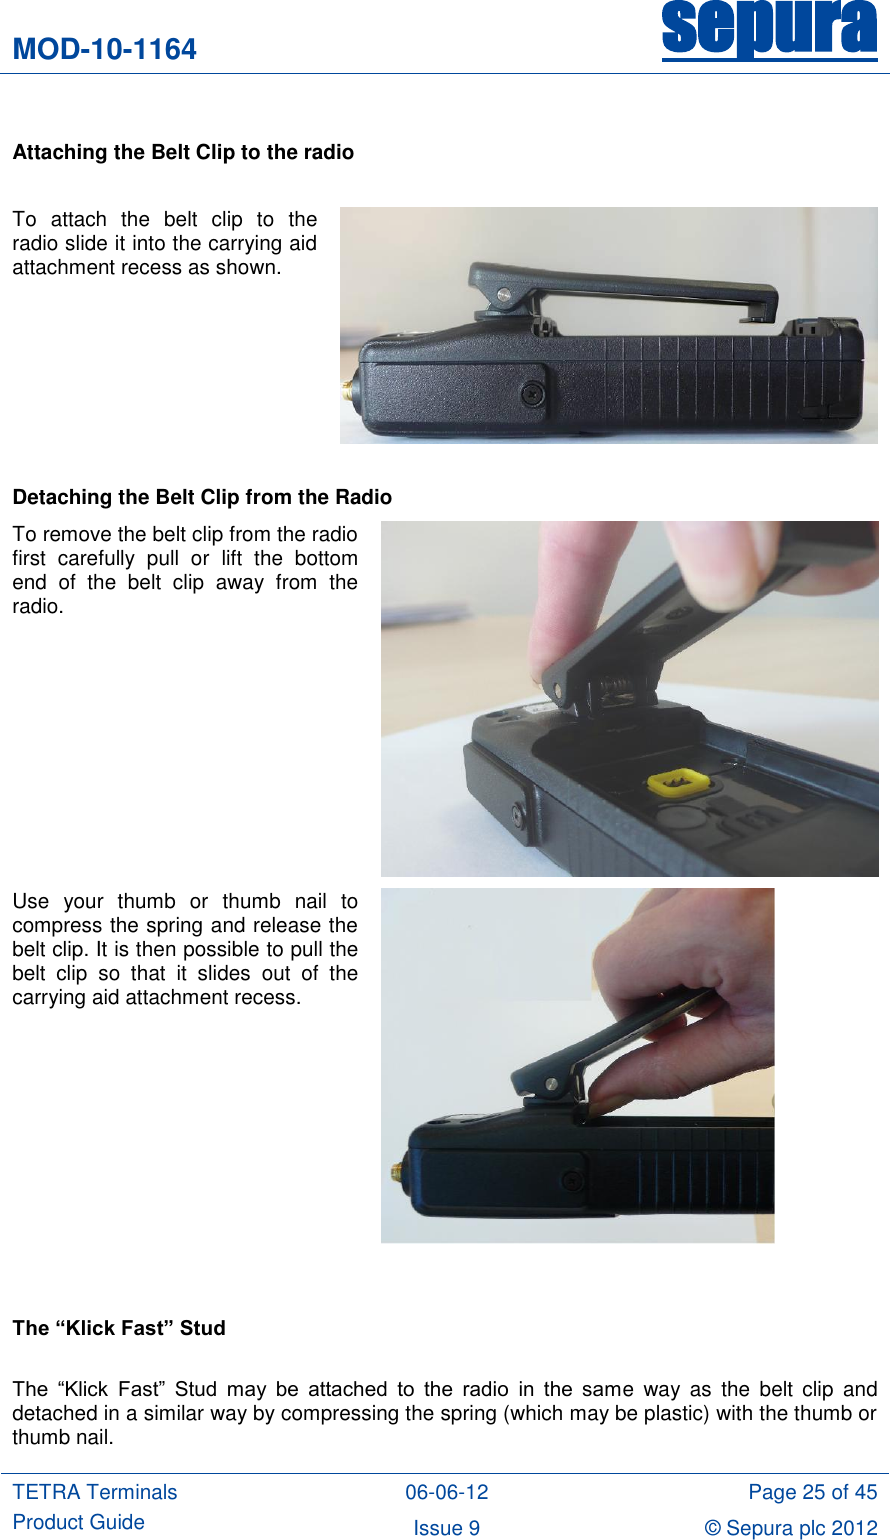 MOD-10-1164 sepura  TETRA Terminals Product Guide 06-06-12 Page 25 of 45 Issue 9 © Sepura plc 2012    Attaching the Belt Clip to the radio  To  attach  the  belt  clip  to  the radio slide it into the carrying aid attachment recess as shown.    Detaching the Belt Clip from the Radio To remove the belt clip from the radio first  carefully  pull  or  lift  the  bottom end  of  the  belt  clip  away  from  the radio.   Use  your  thumb  or  thumb  nail  to compress the spring and release the belt clip. It is then possible to pull the belt  clip  so  that  it  slides  out  of  the carrying aid attachment recess.      The “Klick Fast” Stud  The  “Klick  Fast”  Stud  may  be  attached  to  the  radio  in  the  same  way  as  the  belt  clip  and detached in a similar way by compressing the spring (which may be plastic) with the thumb or thumb nail.  